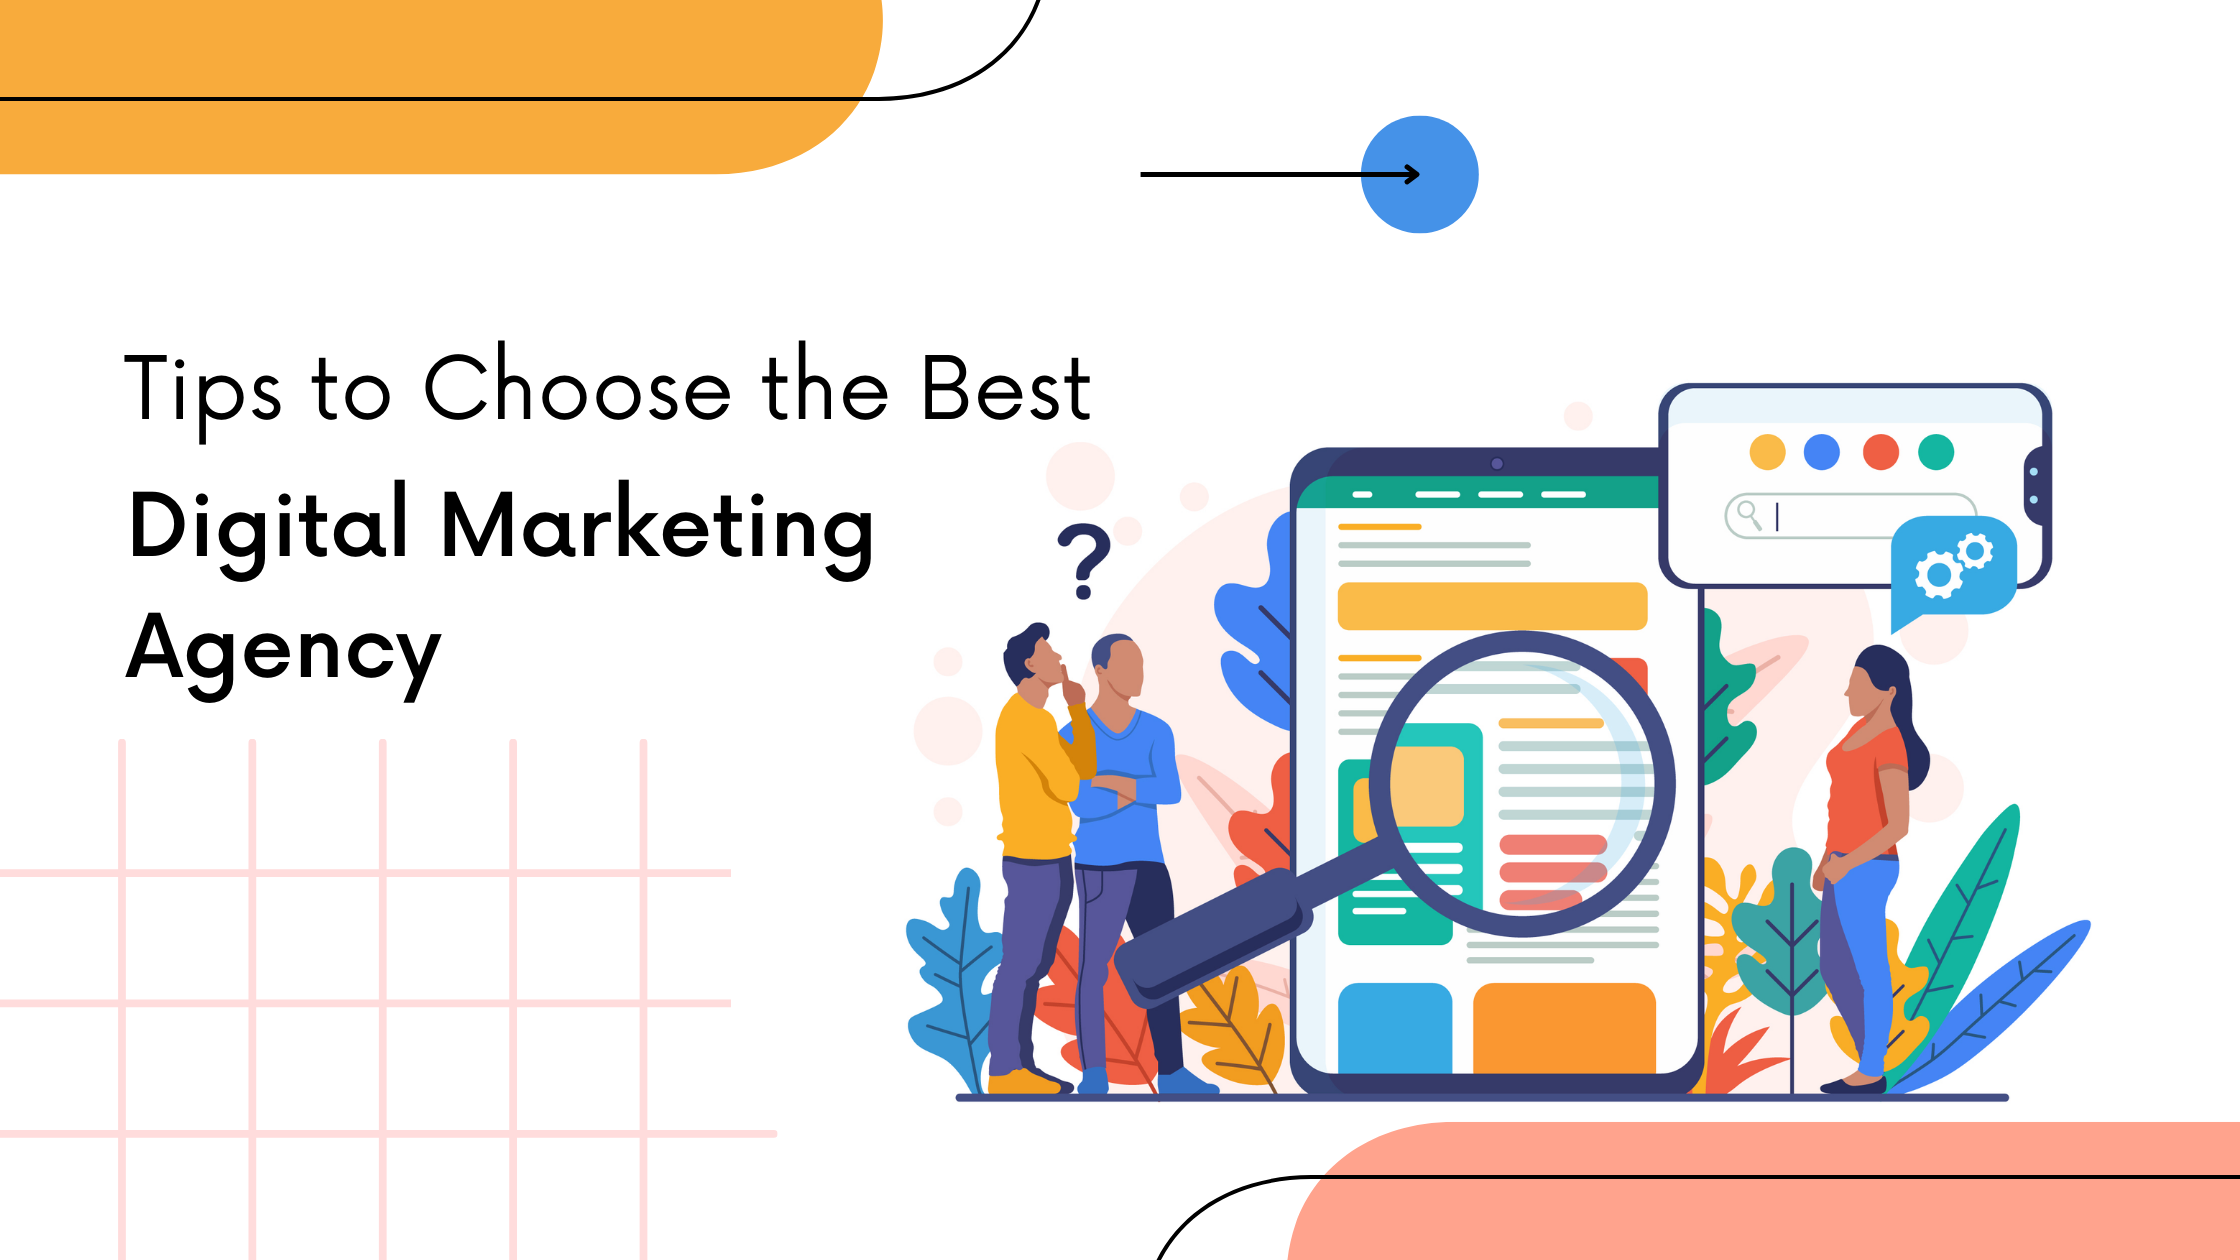 Core tips to choose the best digital marketing agency